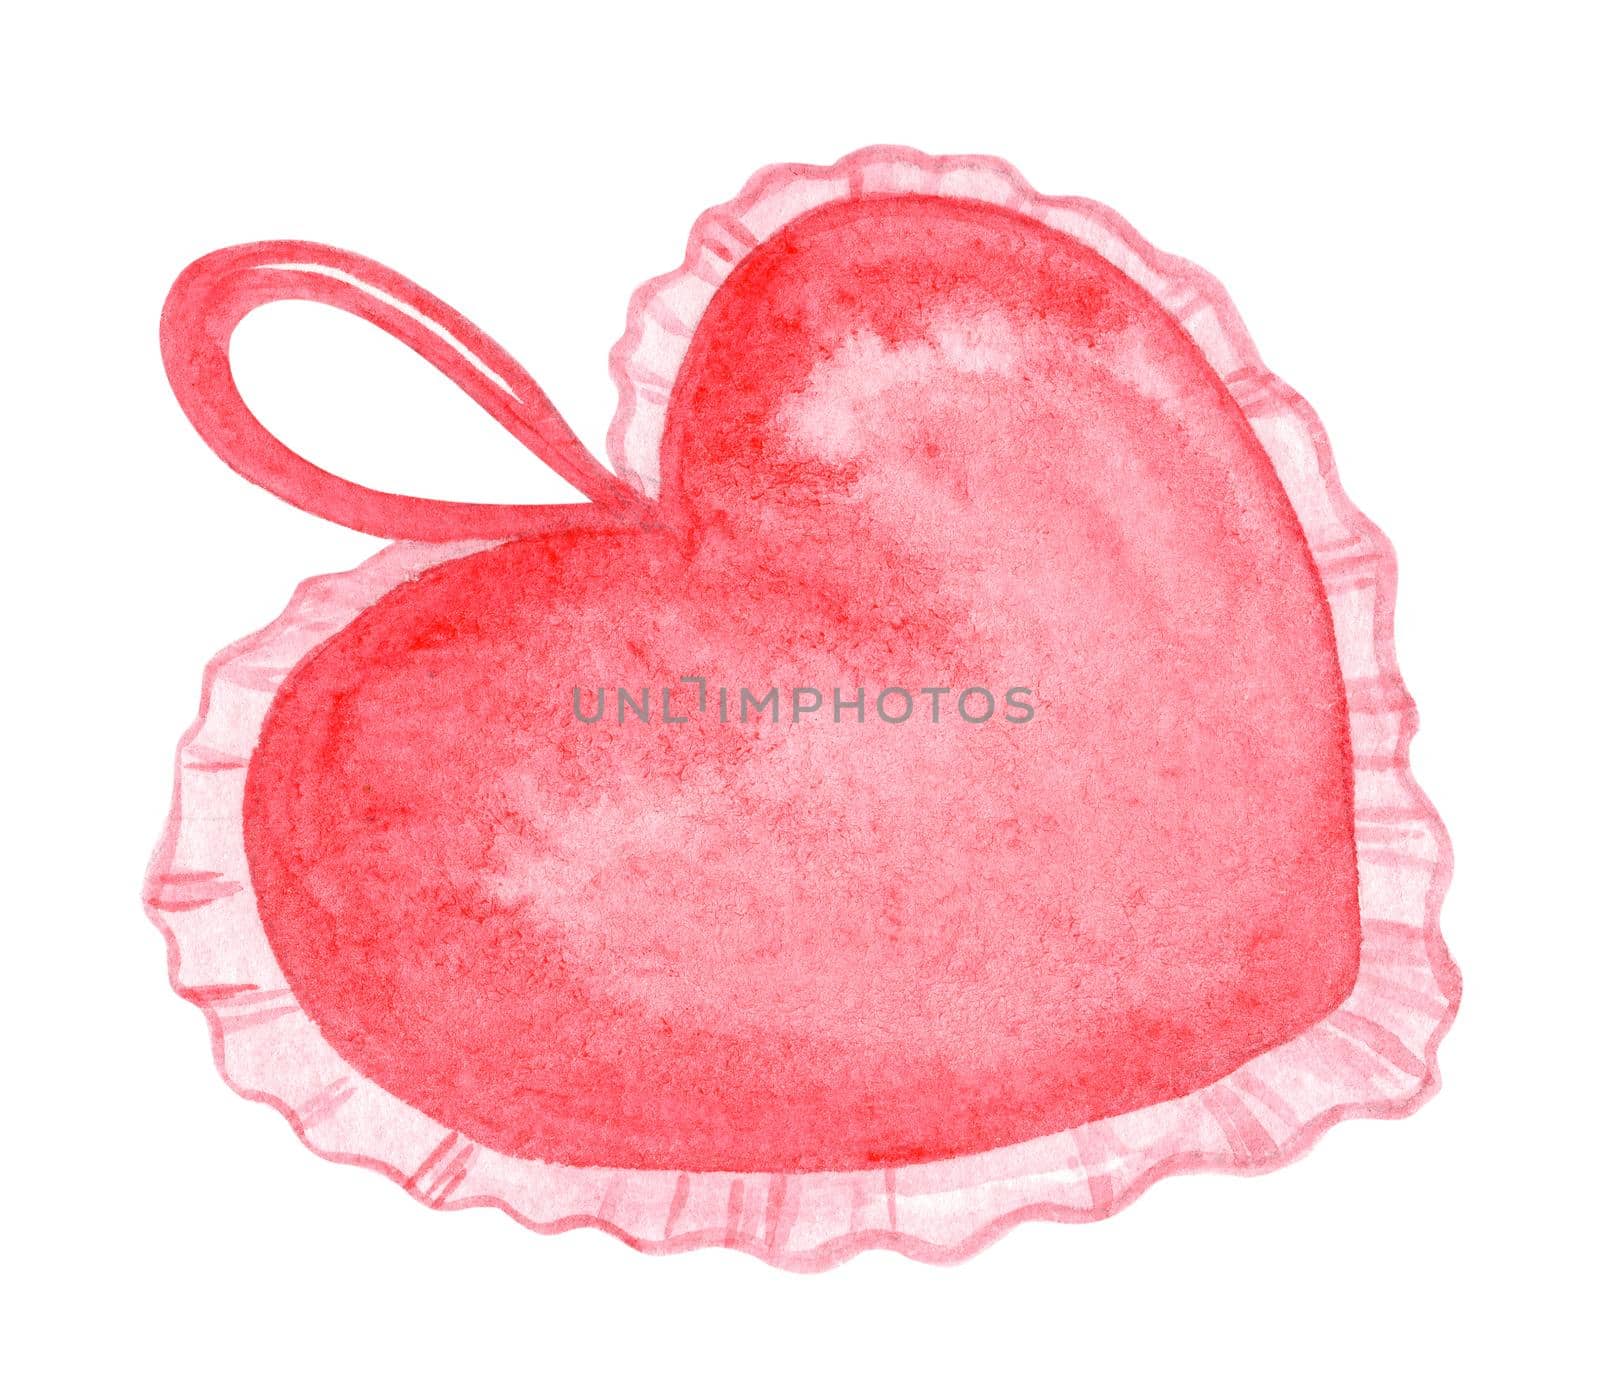 Watercolor red pin cushion isolated on white background. Heart pillow for needles by dreamloud